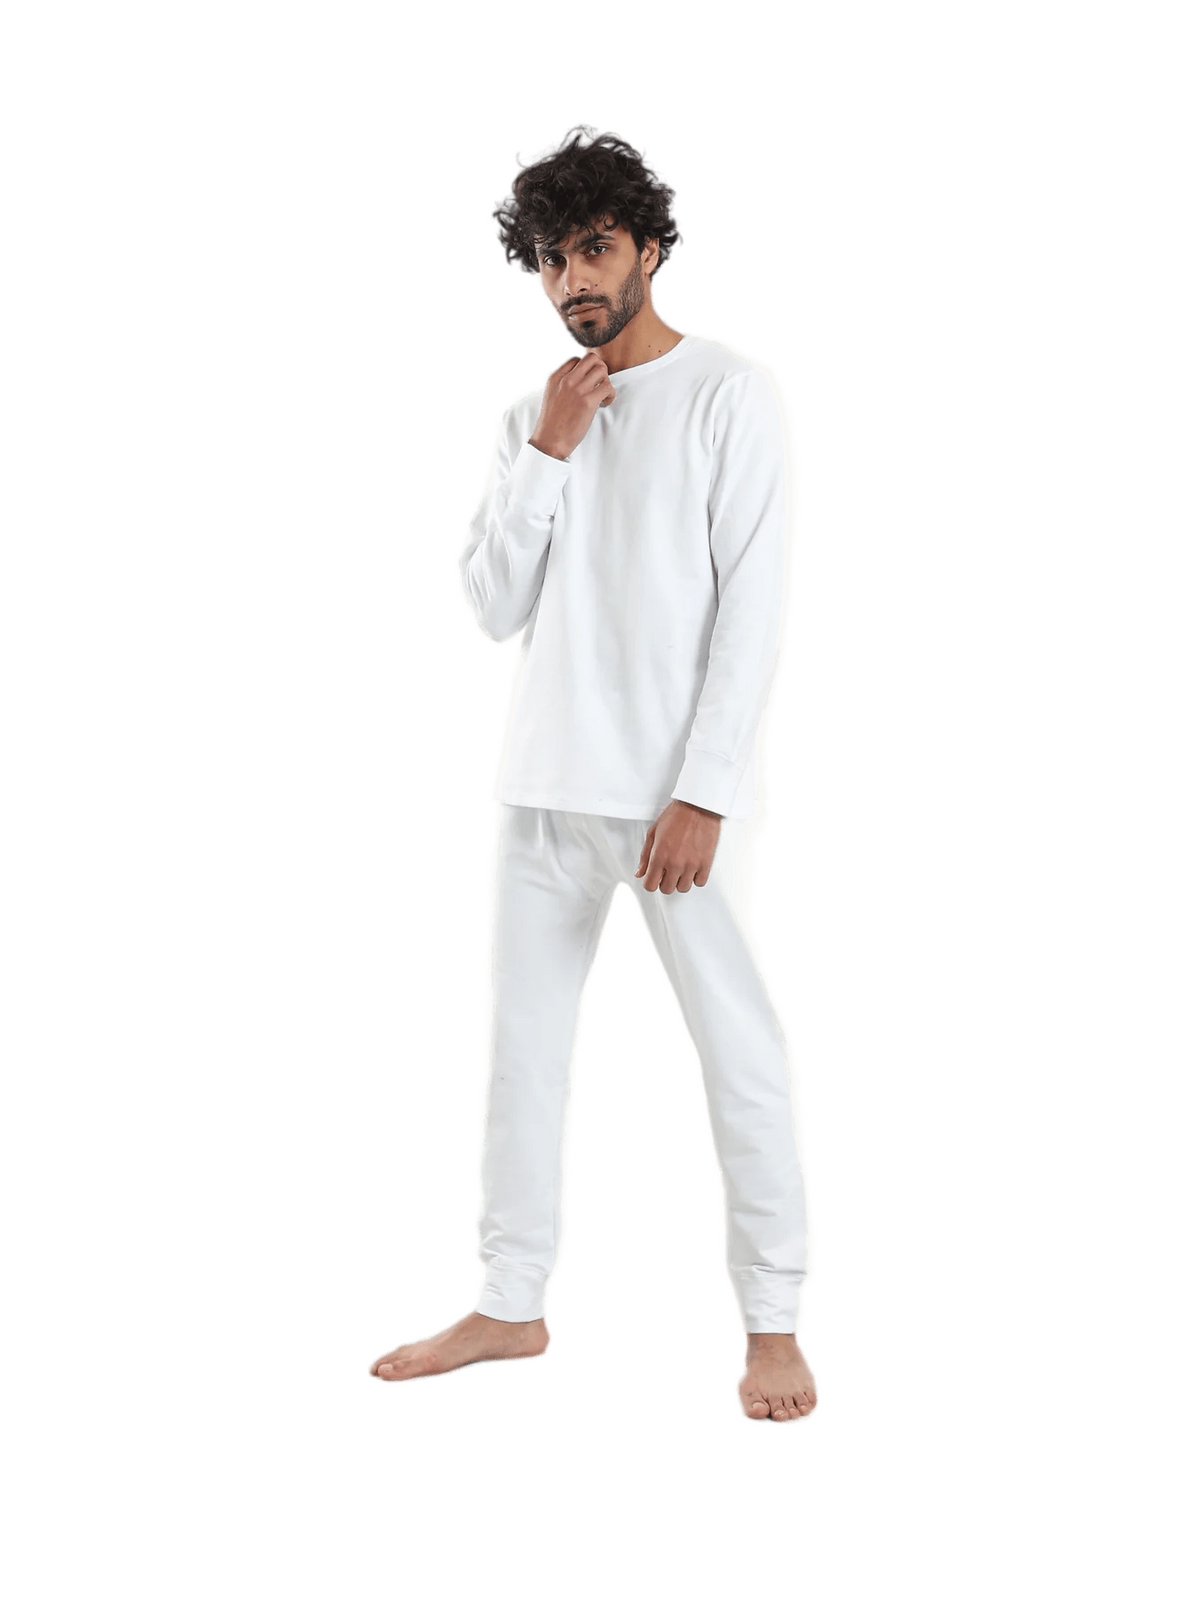 Red Cotton Cozy and Comfortable Thermal Set For men padded inside-White